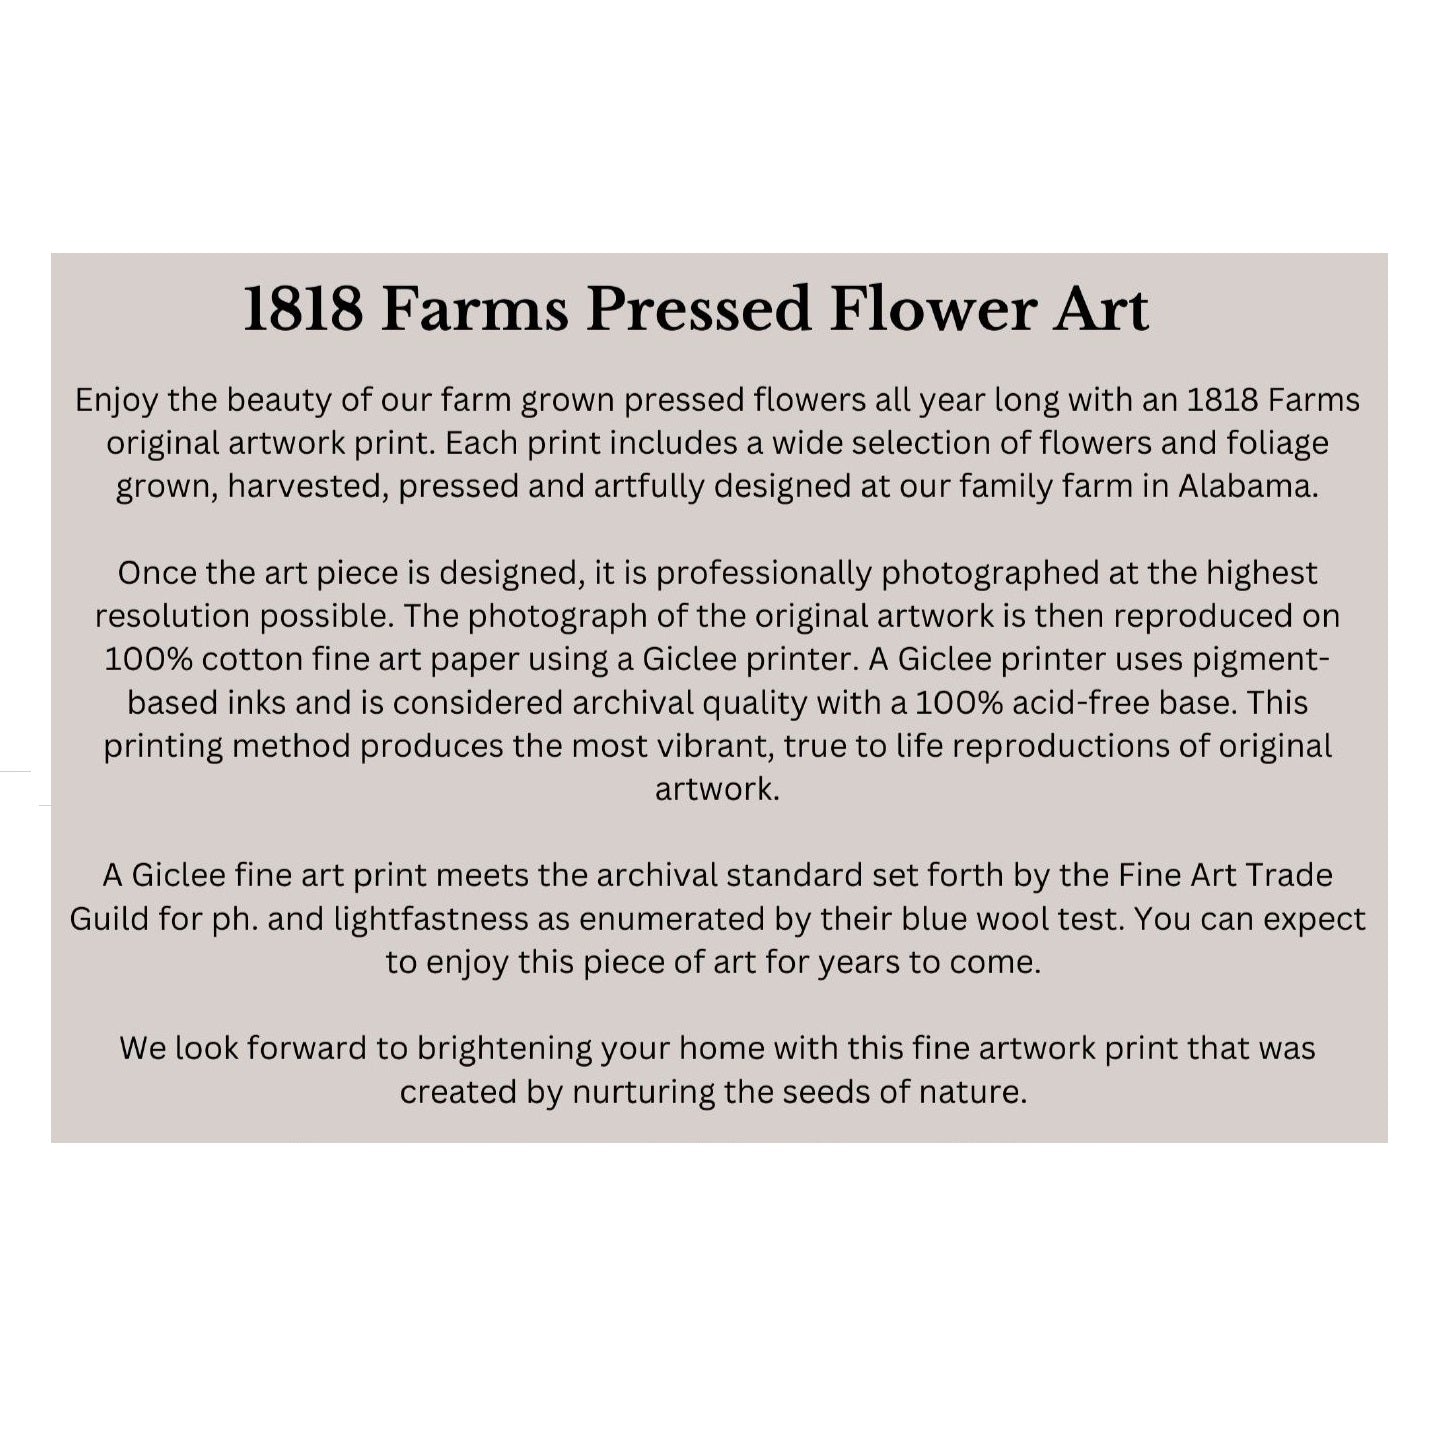 State Themed Giclée Print Featuring Dried, Pressed Flowers - "Where I Bloom" Collection Giclee Art Print 1818 Farms   